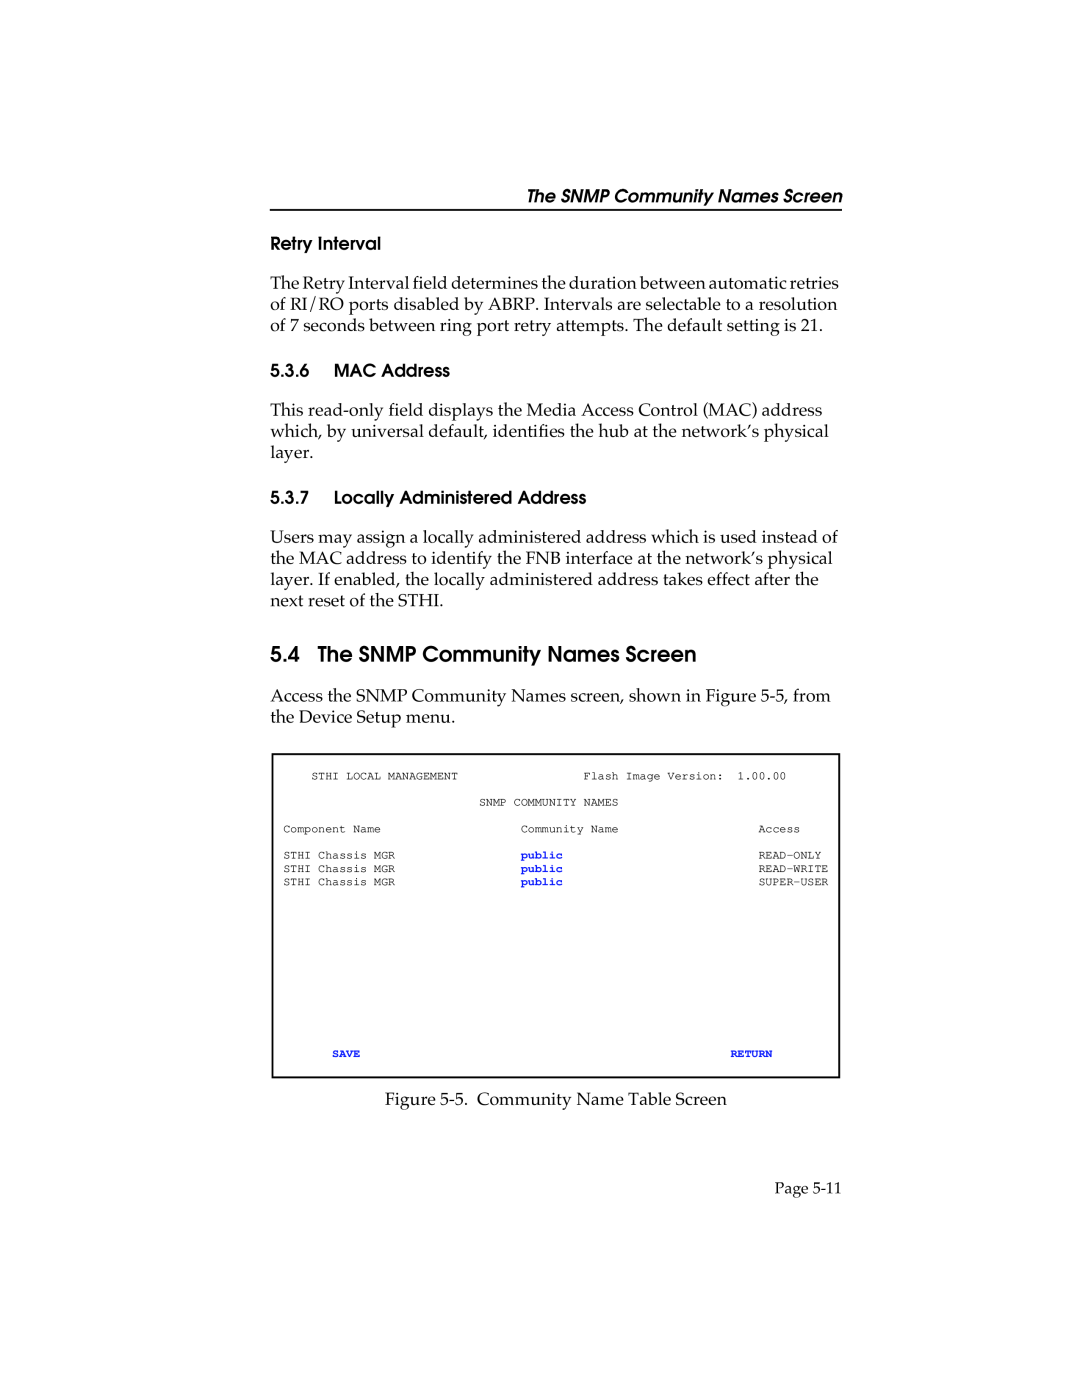 Cabletron Systems STHI manual The SNMP Community Names Screen, Retry Interval, MAC Address, Locally Administered Address 